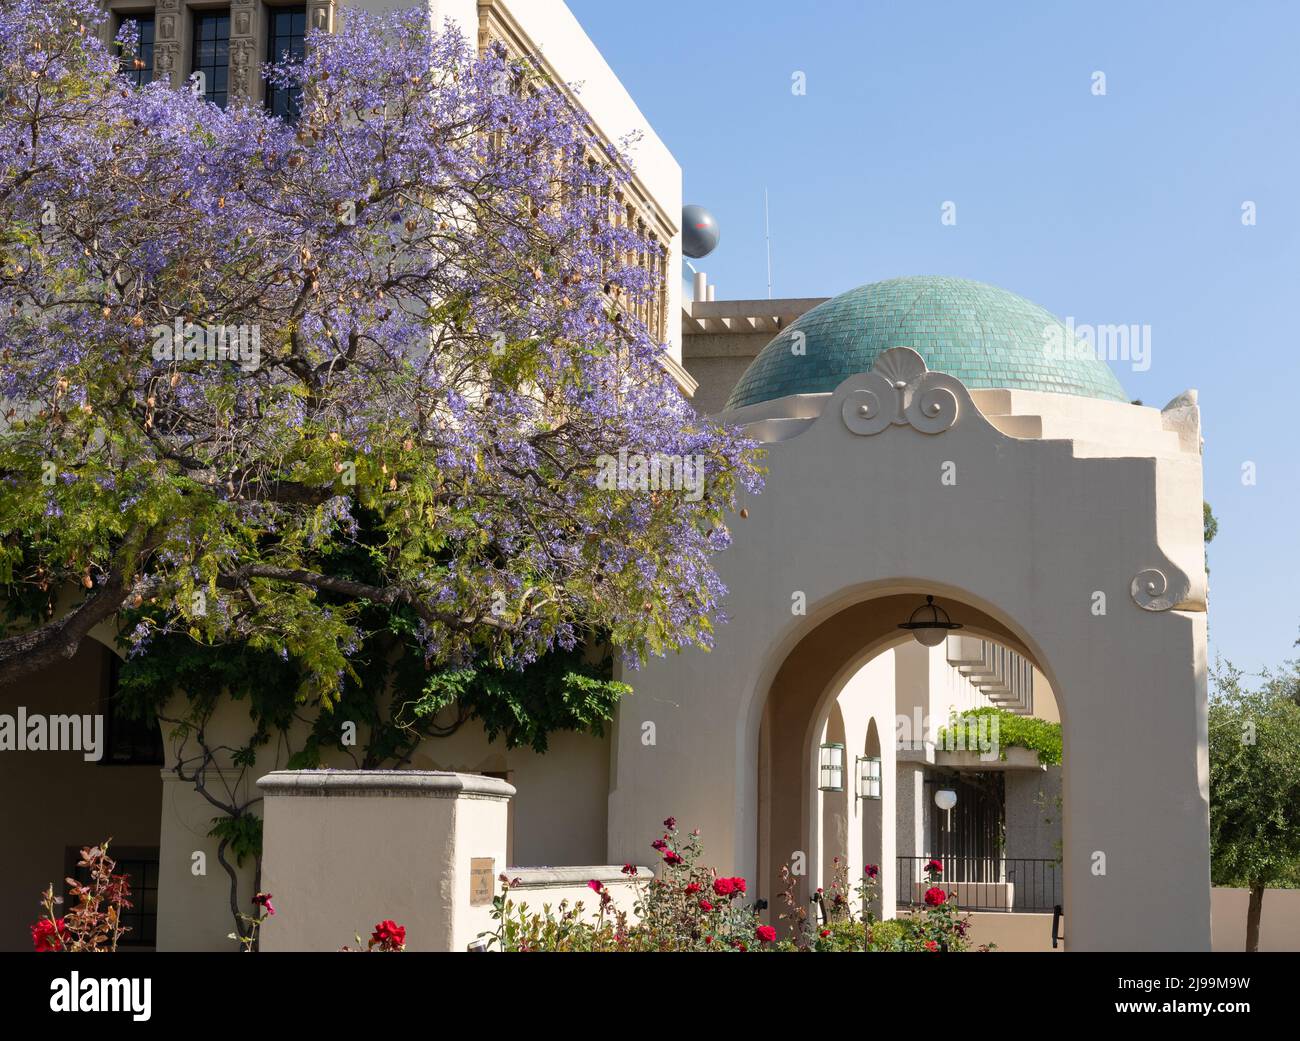 Southern california architecture at Caltech Stock Photo